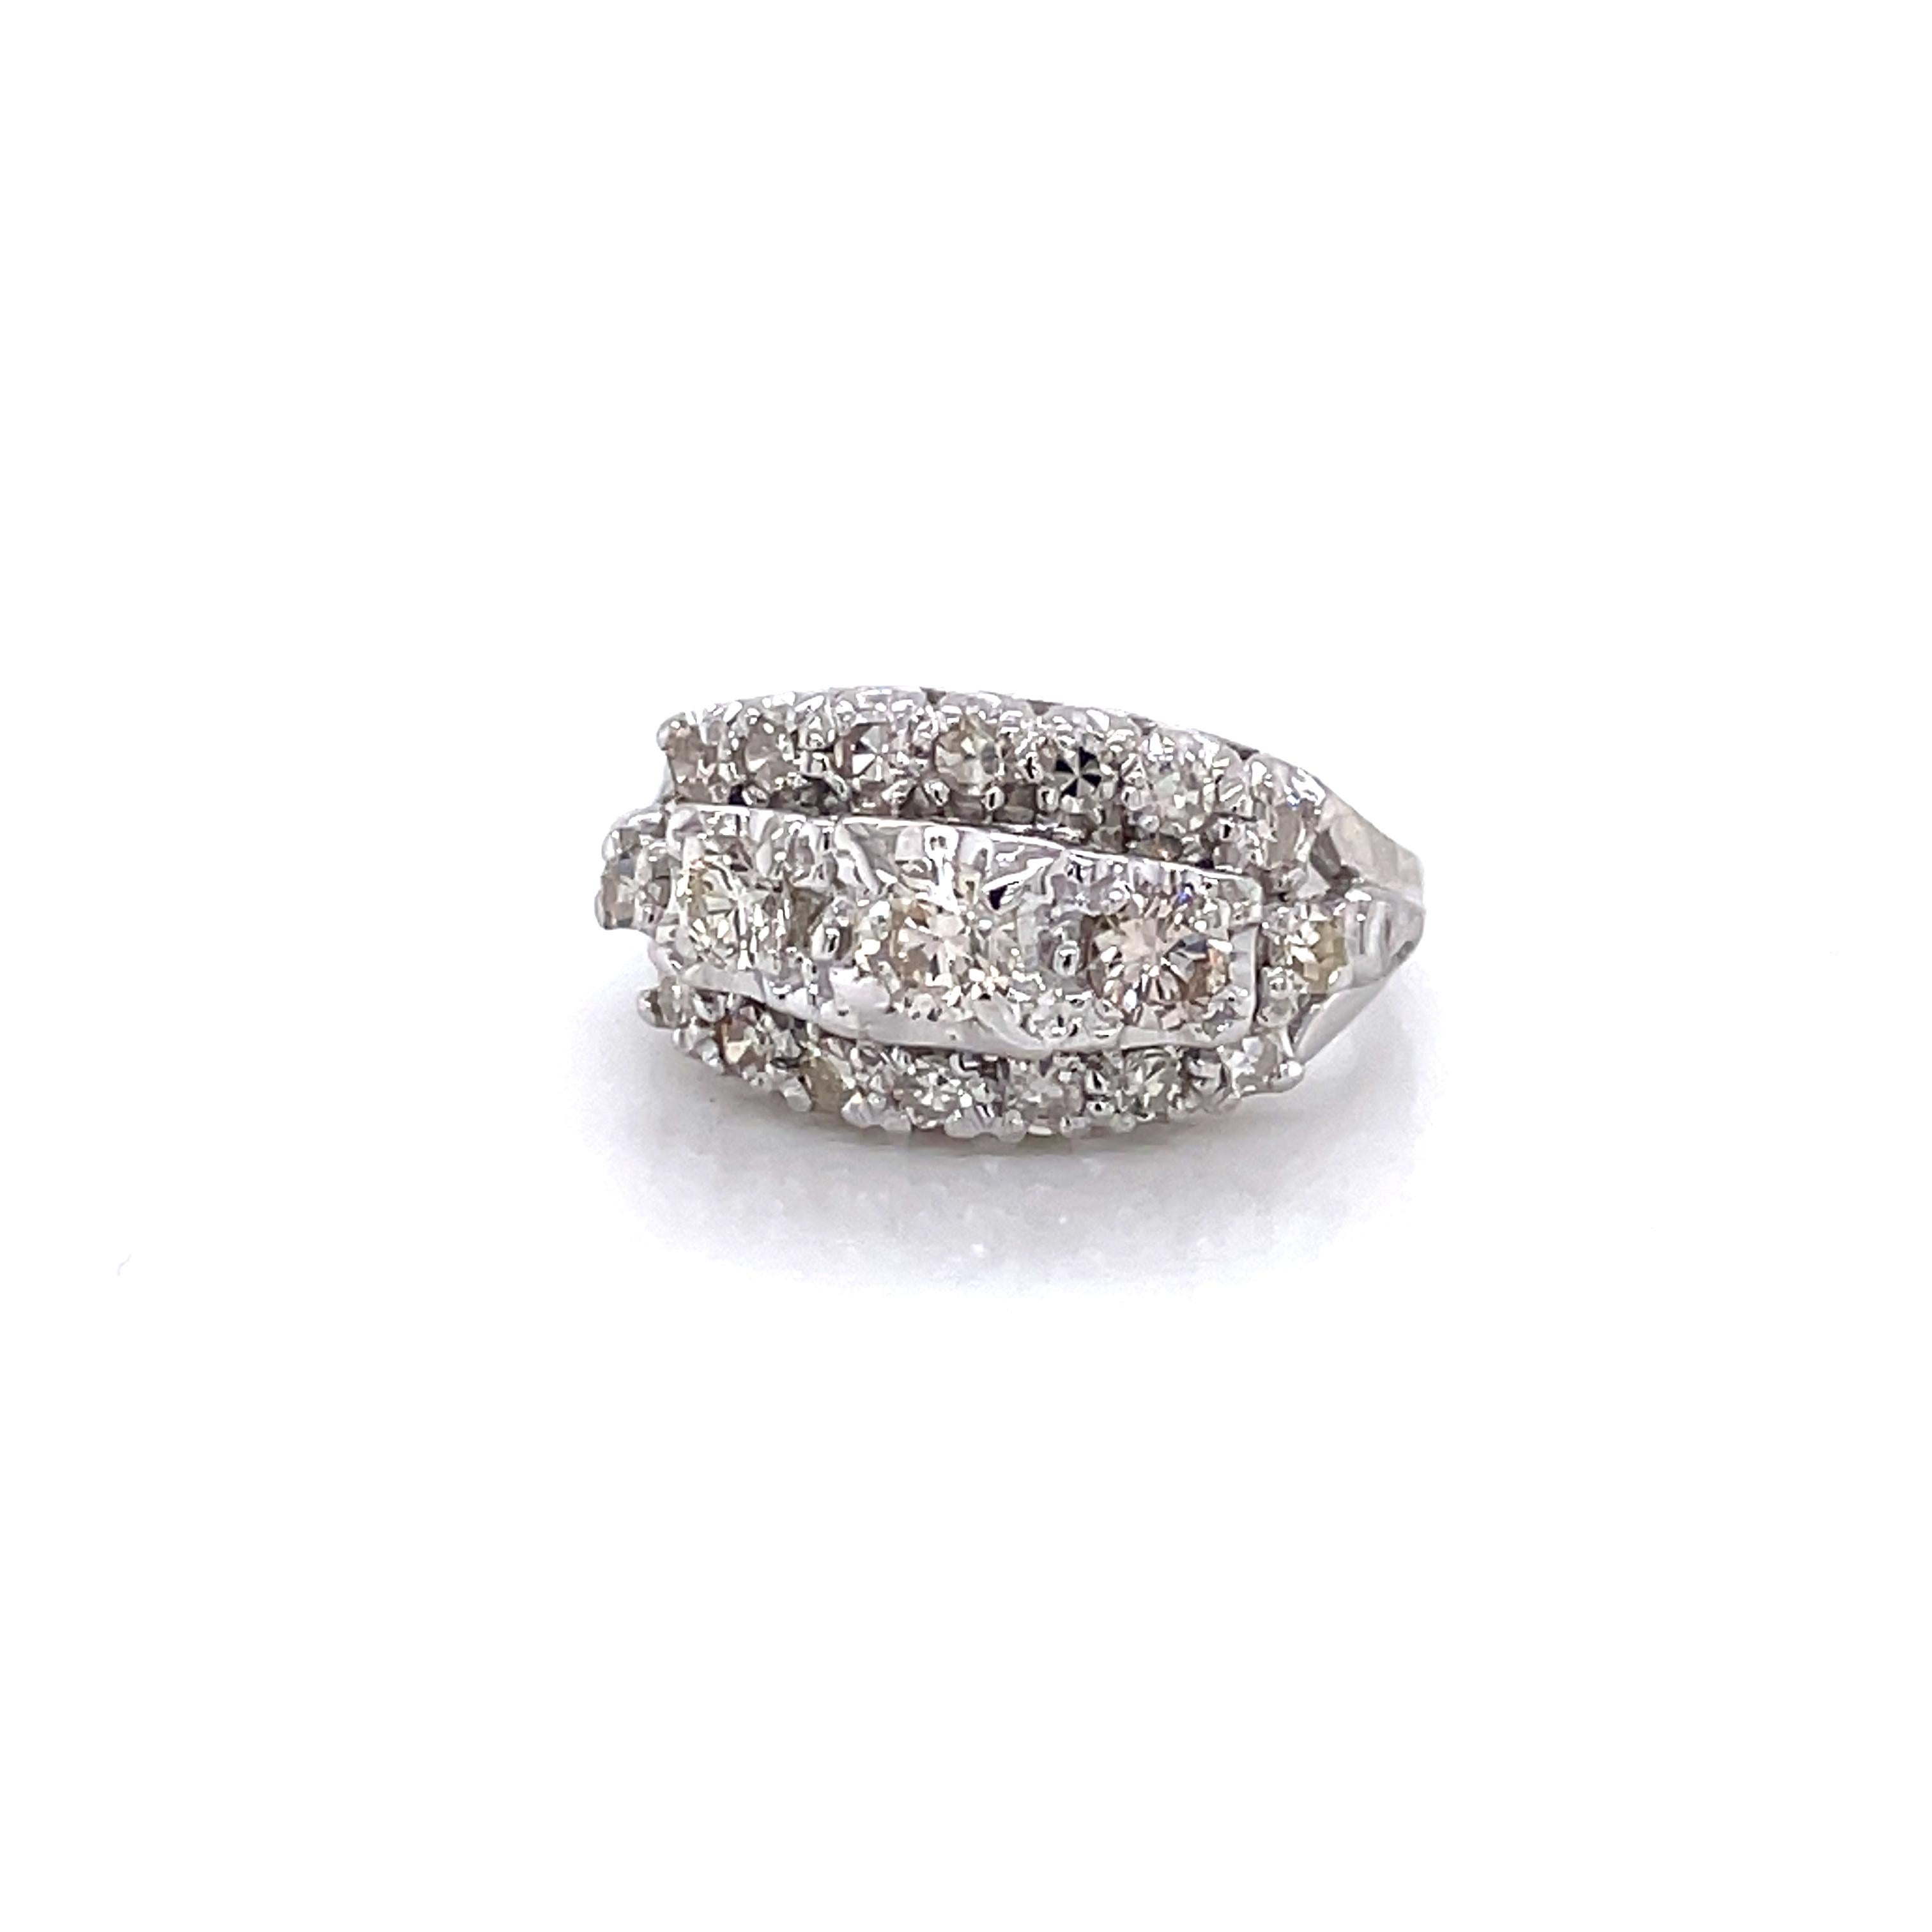 Thirty one round faceted H/VS diamonds, .52 carats total weight, generously crown the dome style of this impressive fourteen karat (14K) white gold engagement ring.
Three rows of sparkling diamonds crown the contoured head of this brilliant ring